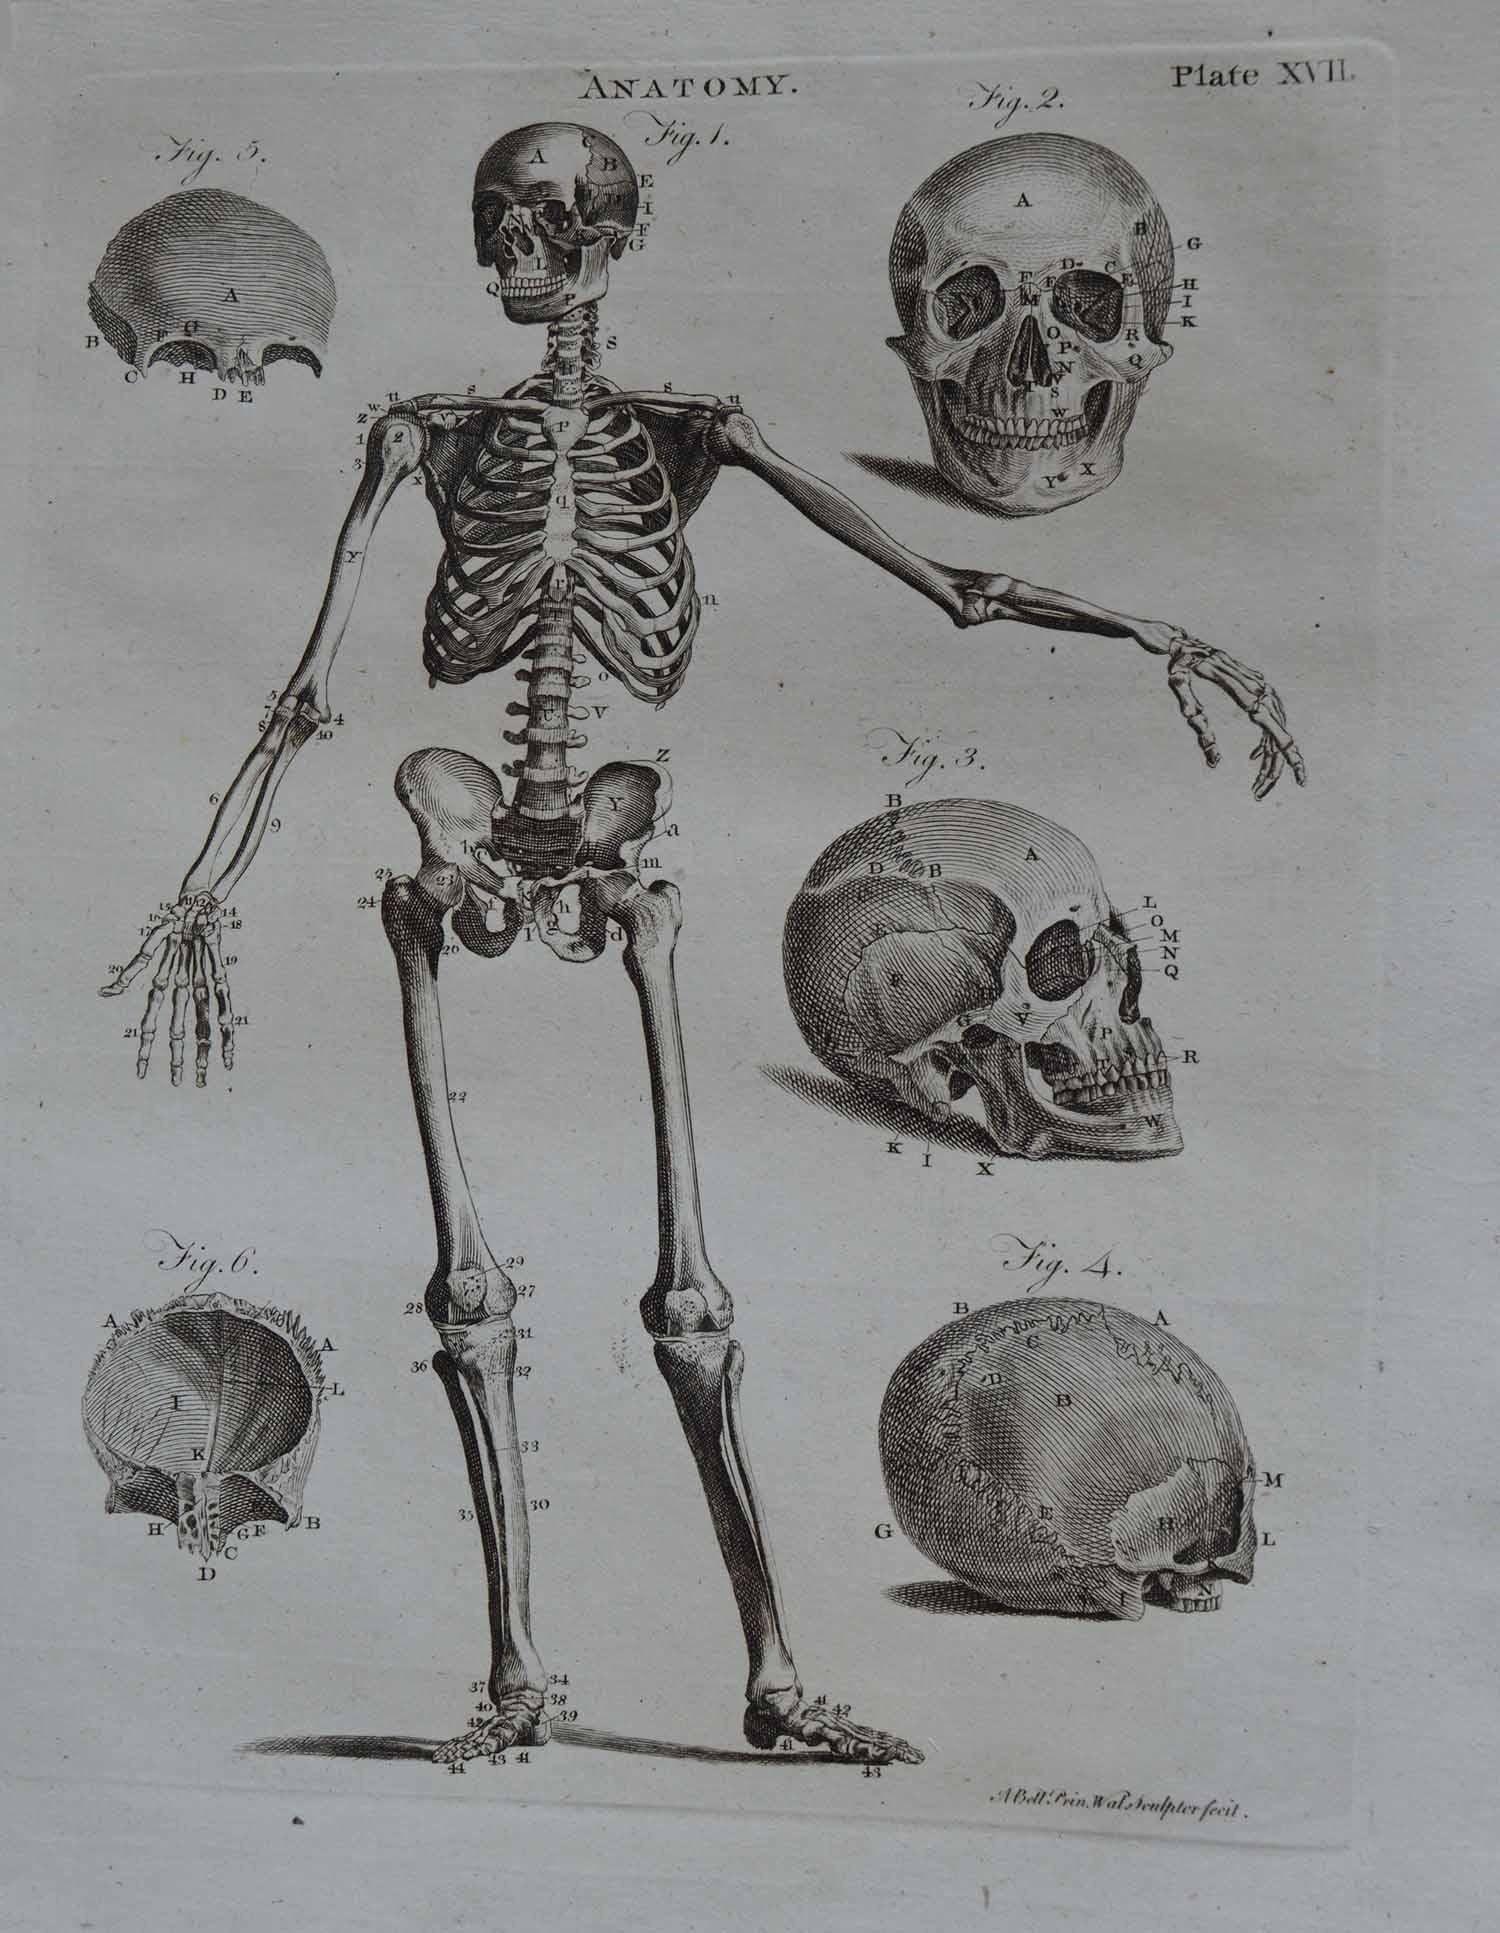 English Set of 9 Anatomical Prints by A.Bell, 18th Century